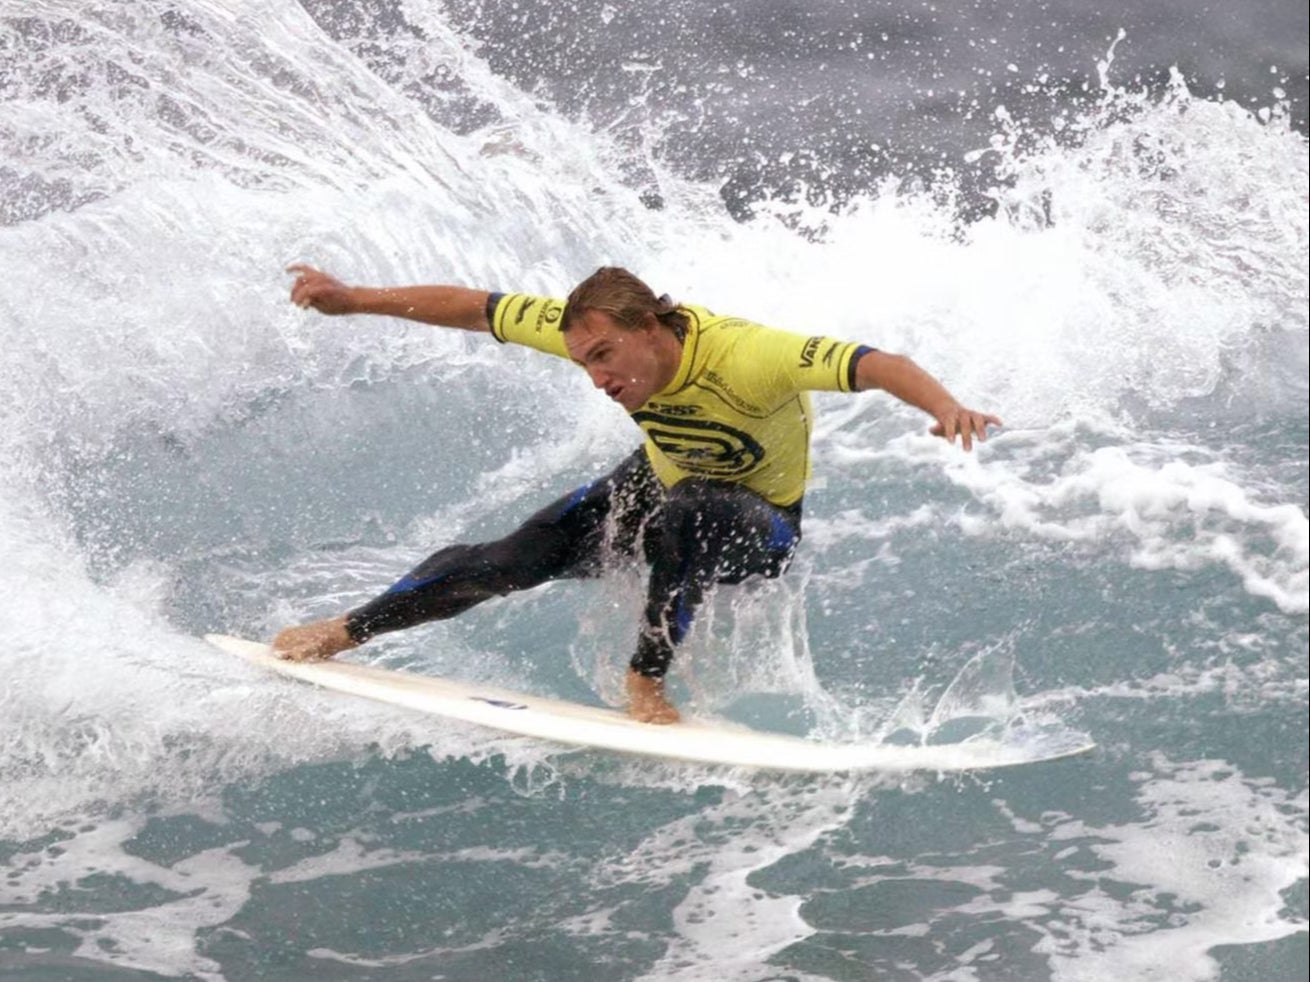 Former pro-surfer Chris Davidson has died after allegedly being punched outside a pub